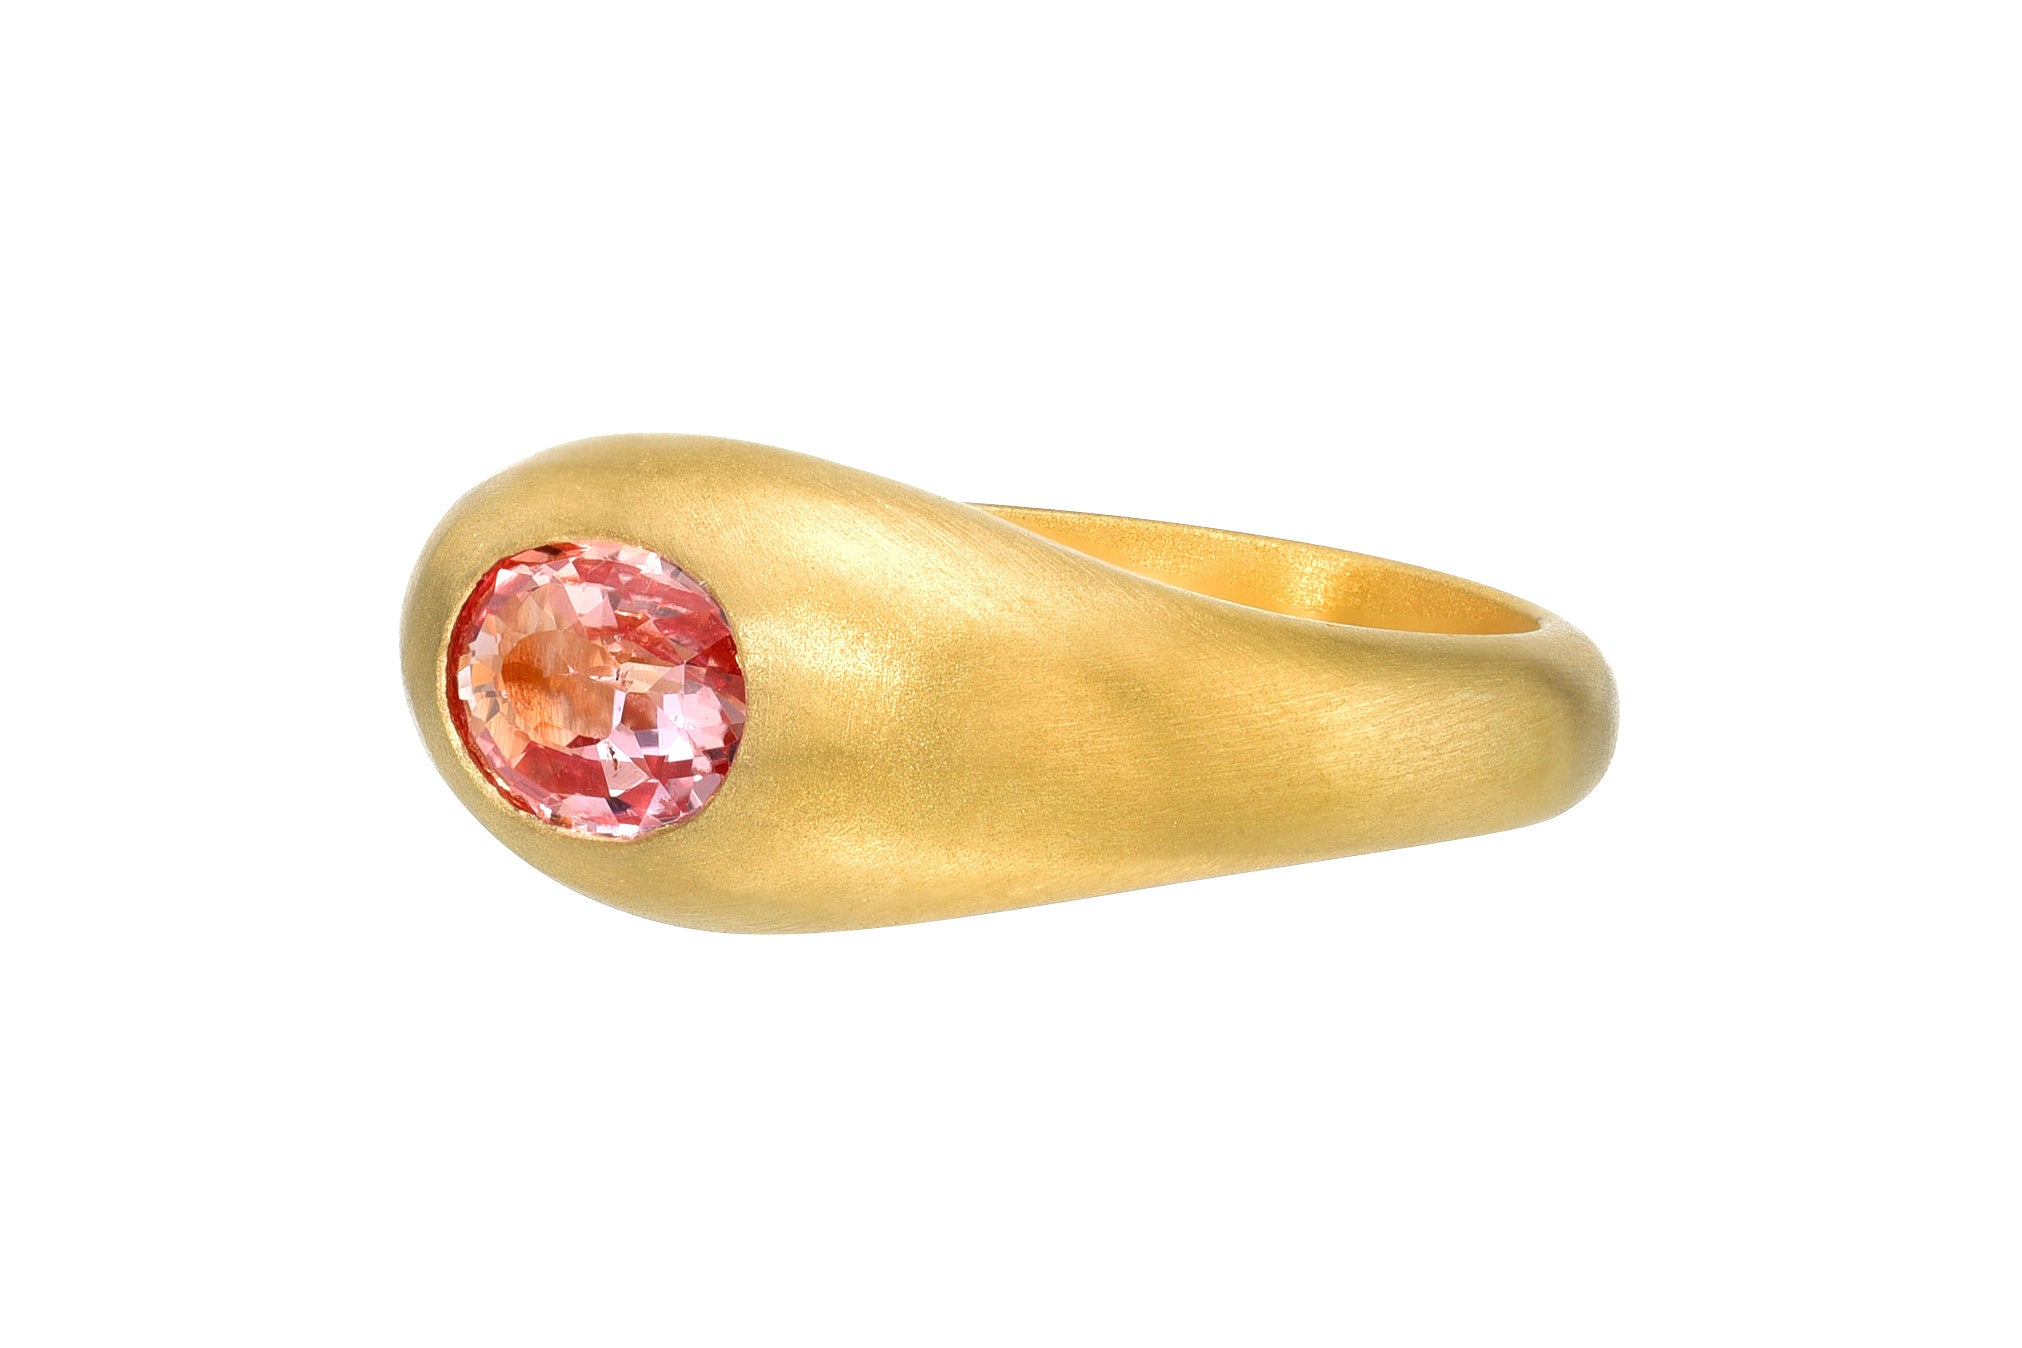 Darius Jewels one of a kind padparadscha sapphire gem signet ring